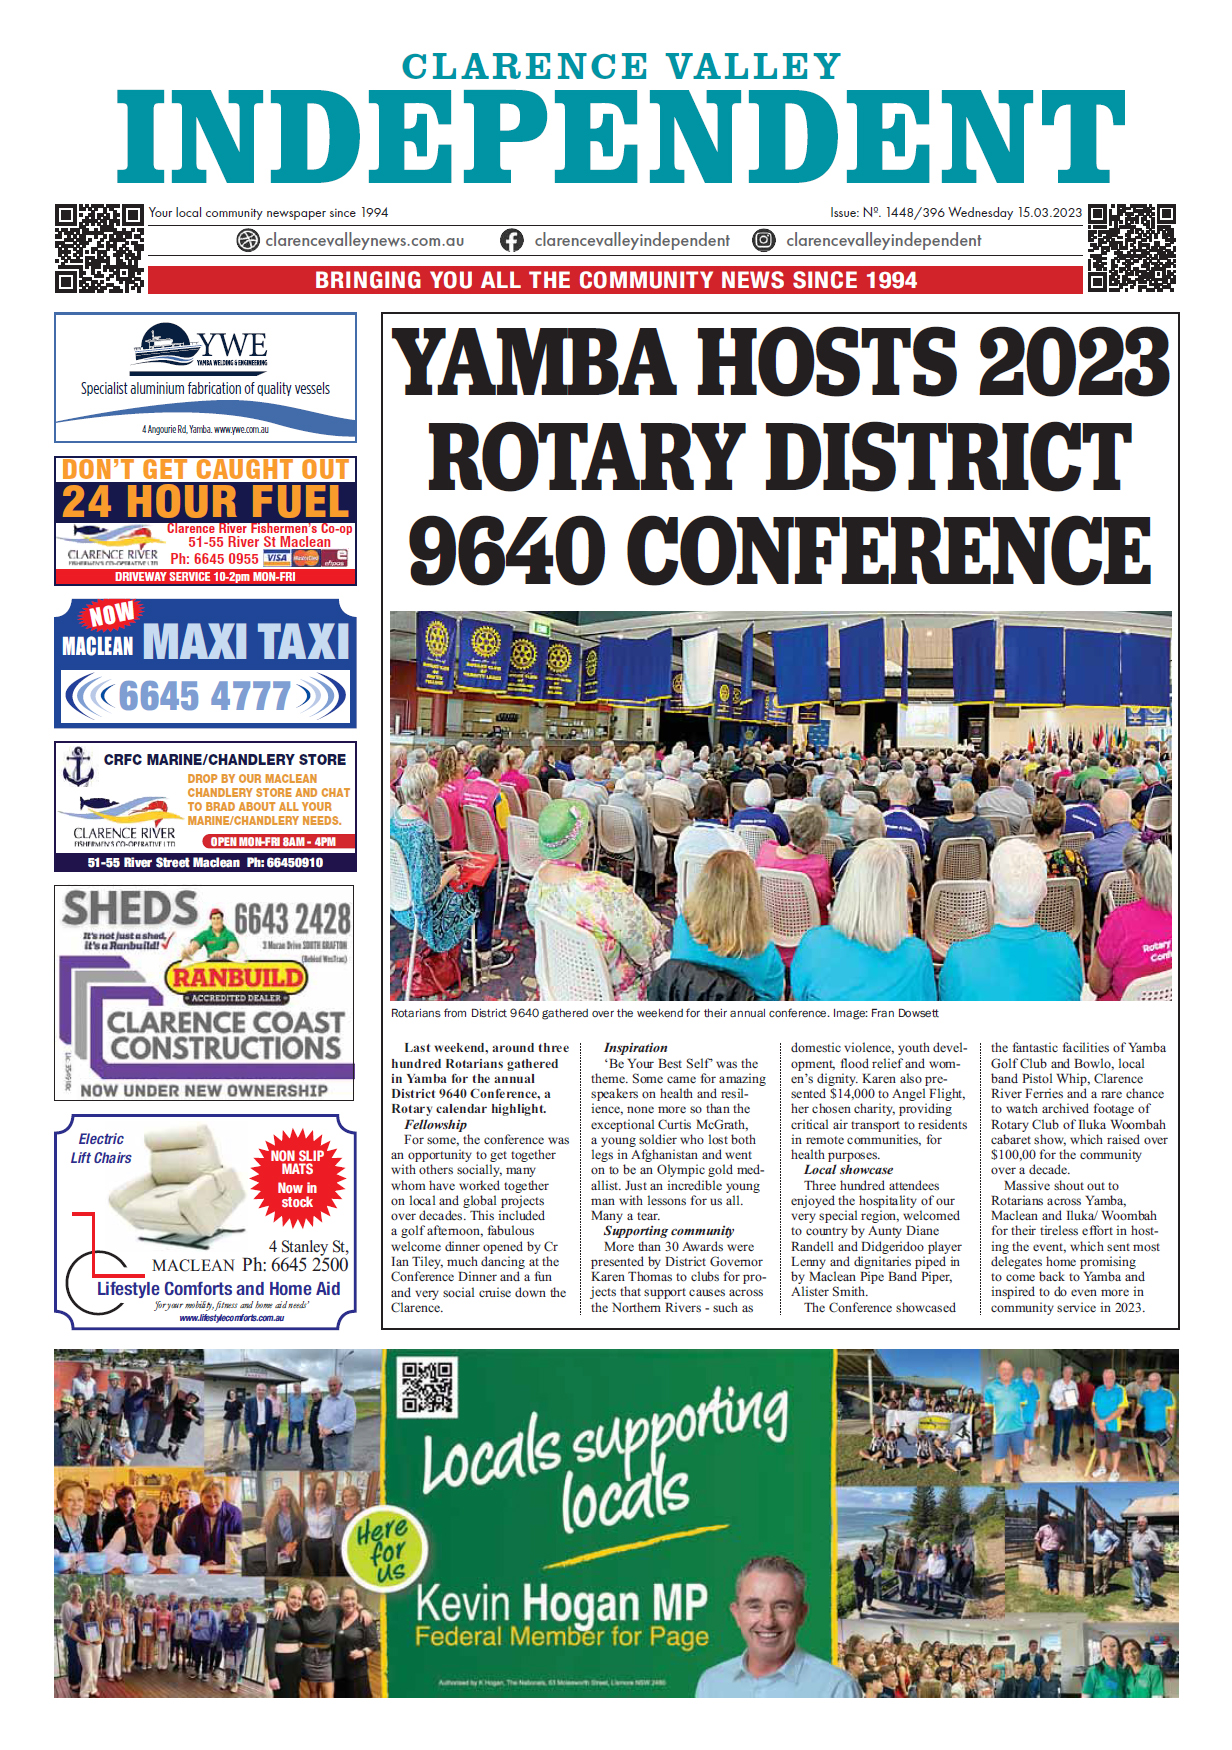 Clarence Valley Independent 15 March 2023